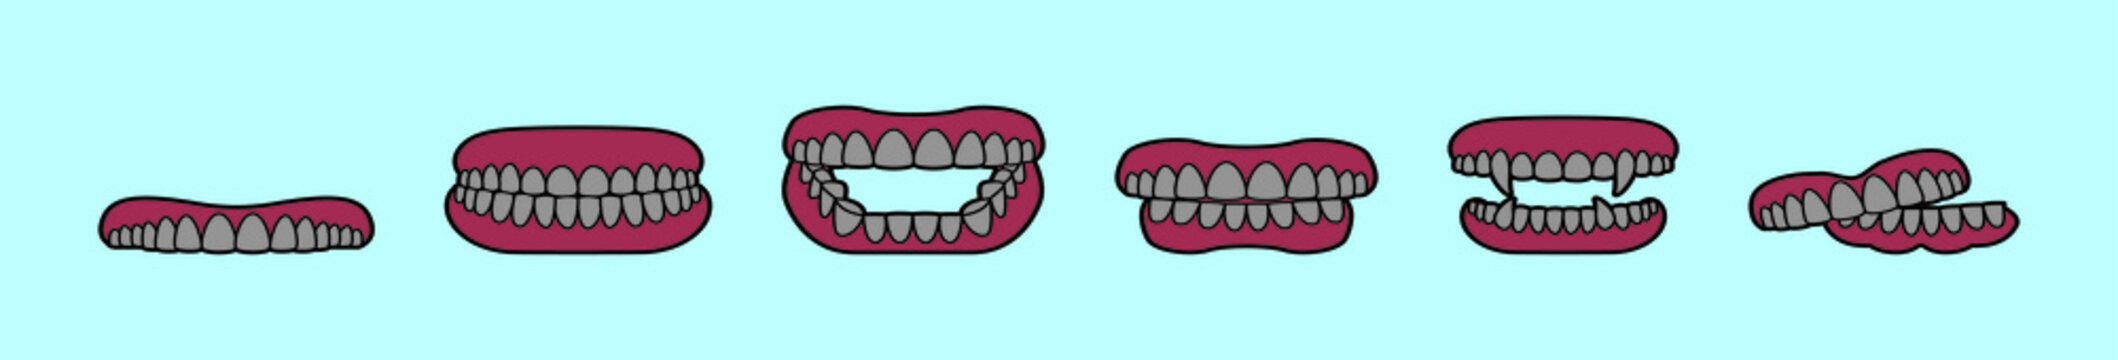 set of false teeth cartoon icon design template with various models. vector illustration isolated on blue background